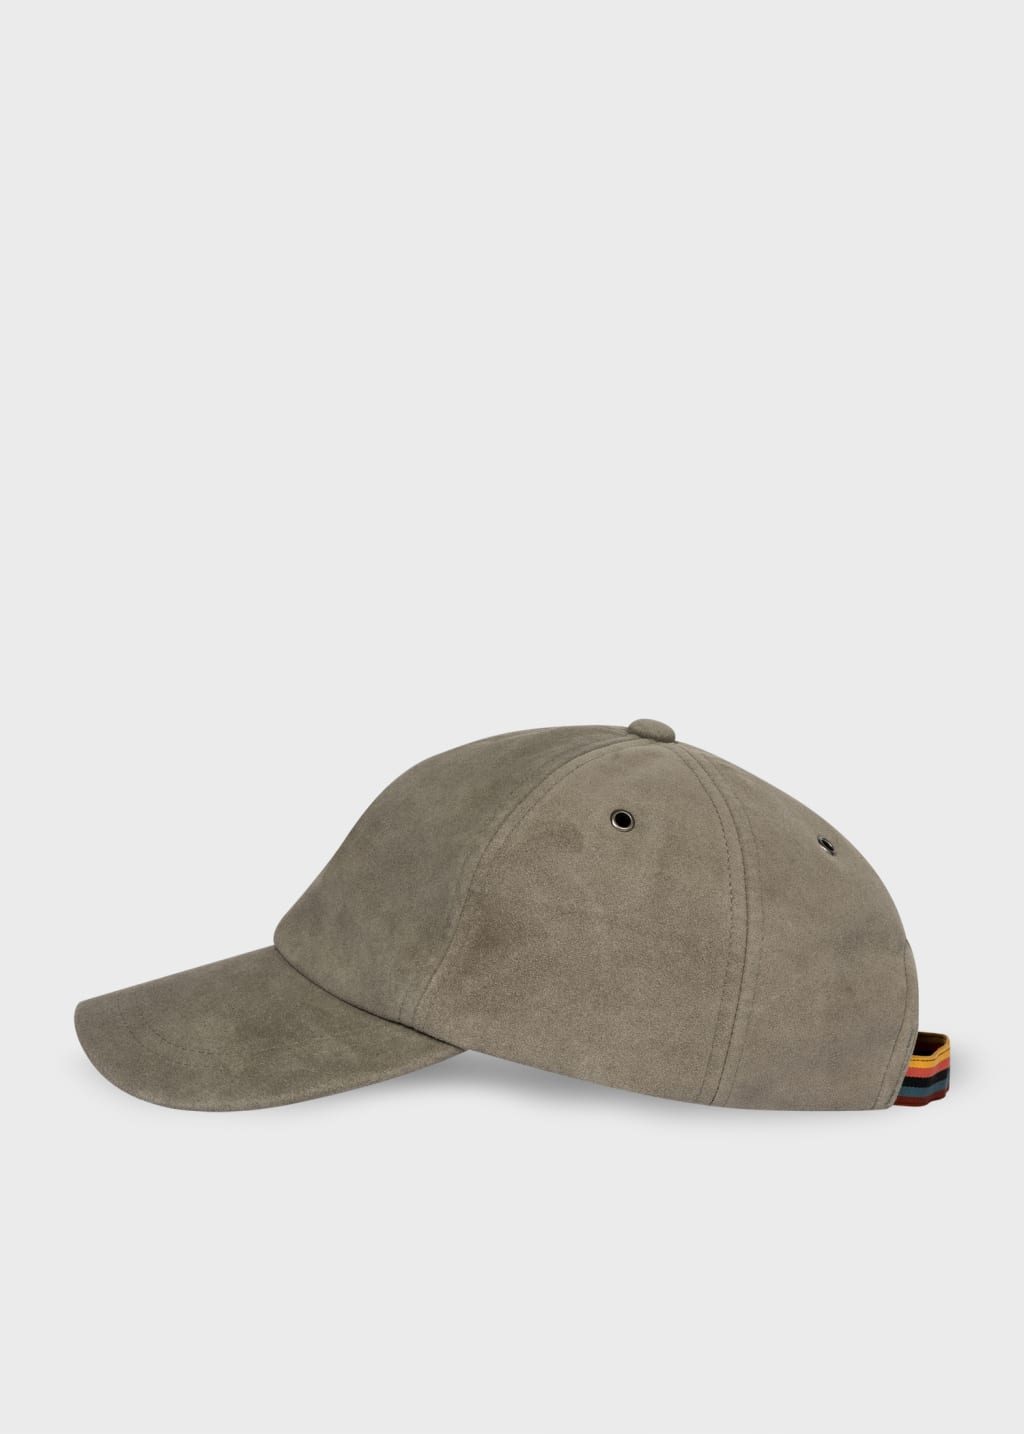 Front View - Washed Khaki Suede Cap Paul Smith